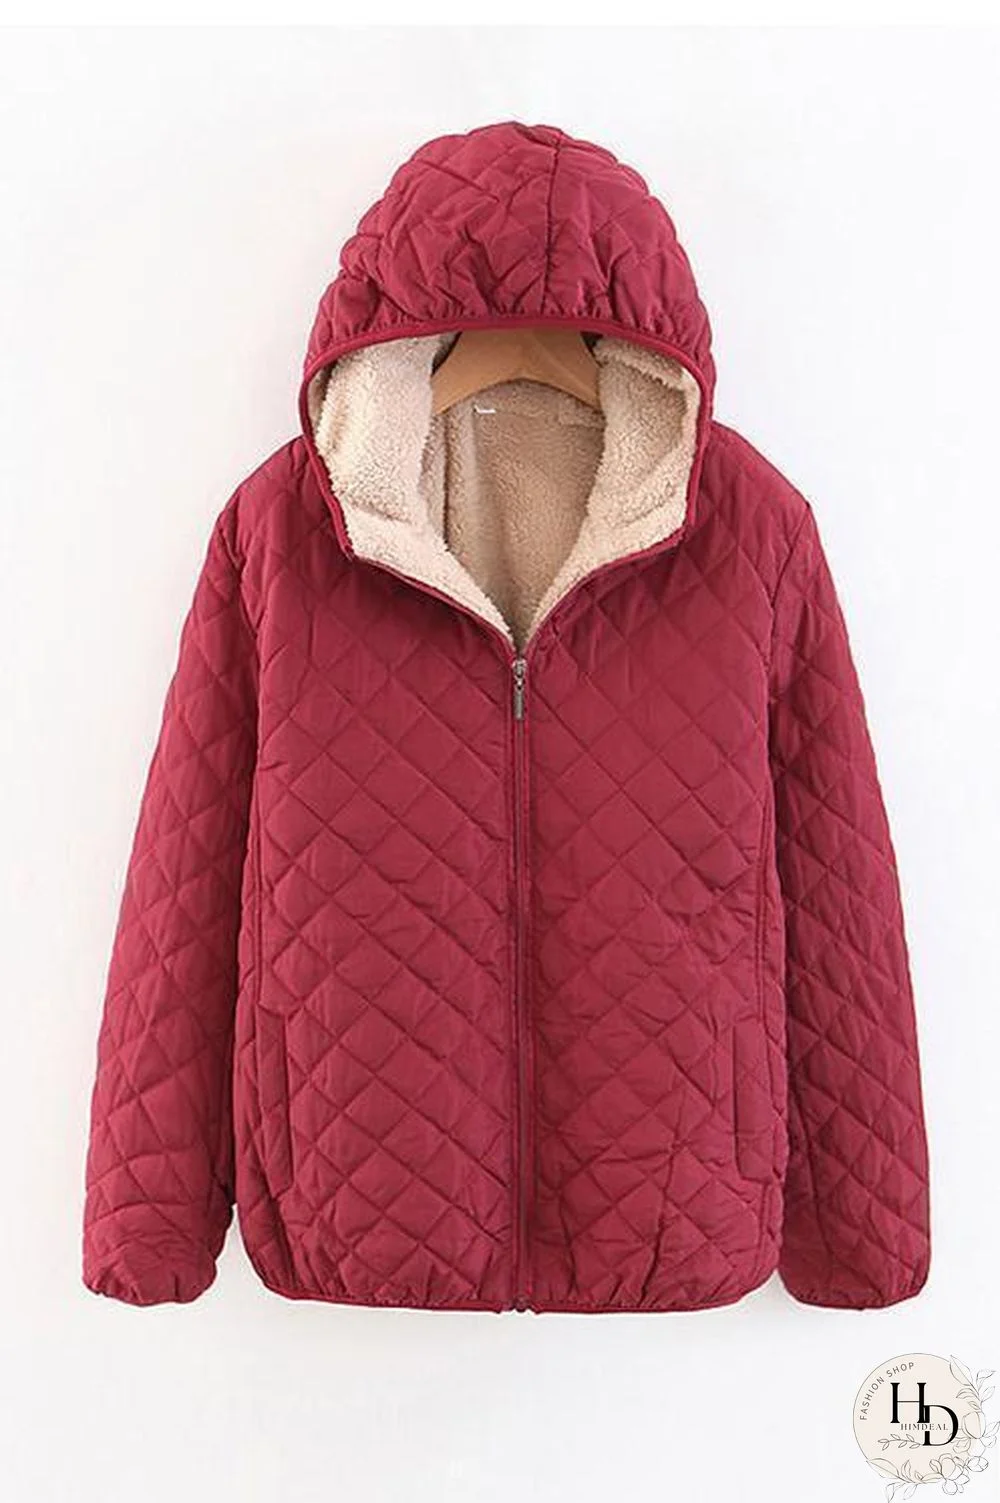 Fleece Hooded Pockets Quilted Jackets